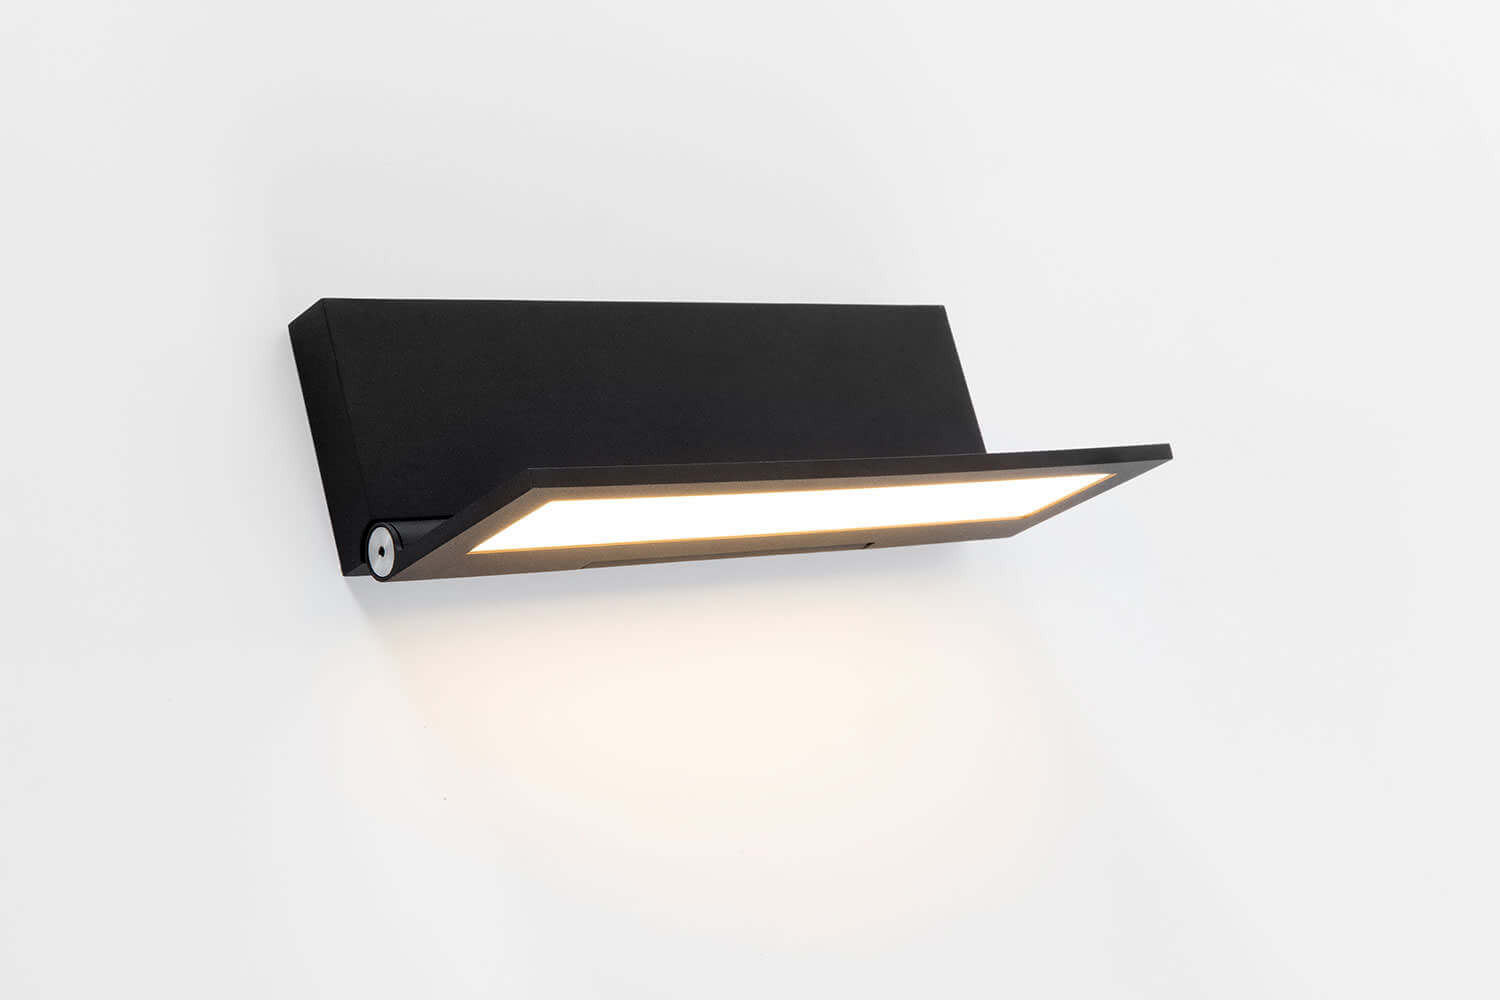 OLED fixture Wollet in black from Modular Lighting Instruments